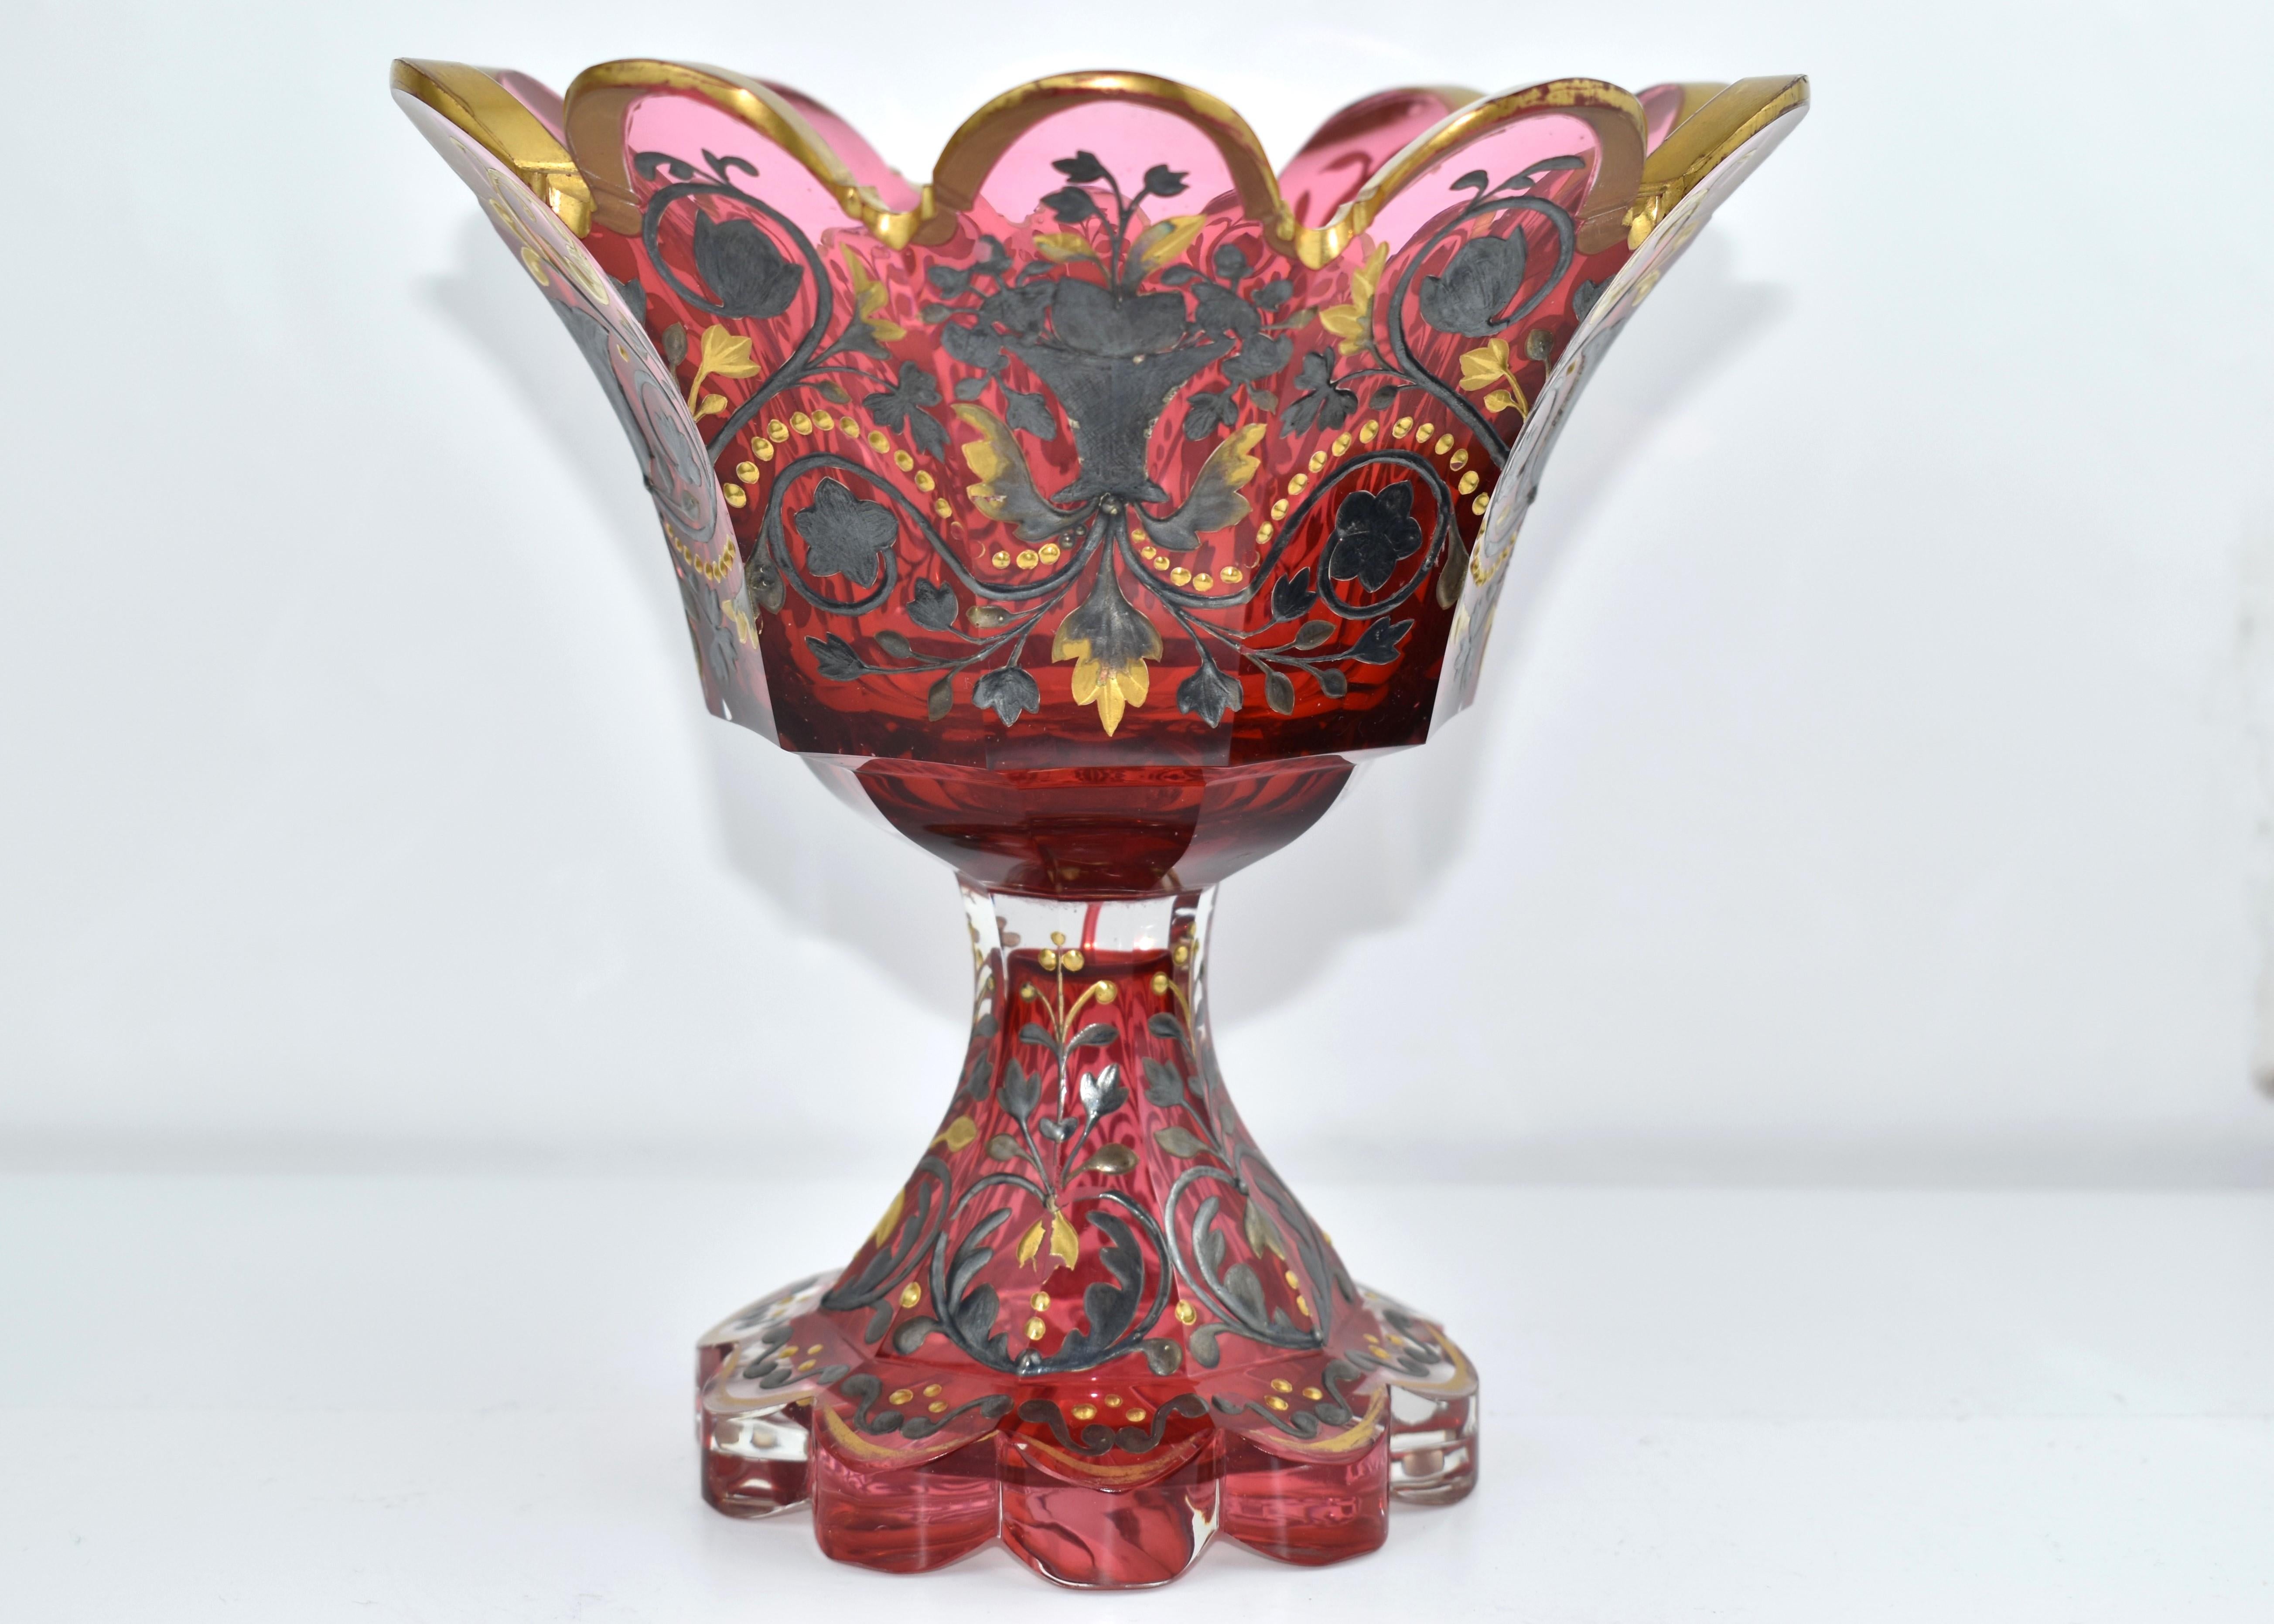 Antique Centerpiece in cranberry glass

stands on a cut glass scalloped foot with flared base at the bottom

richly decorated all around with fine hand-painted gold and silver enamel

fine example of the highest quality Bohemian glass of the 19th